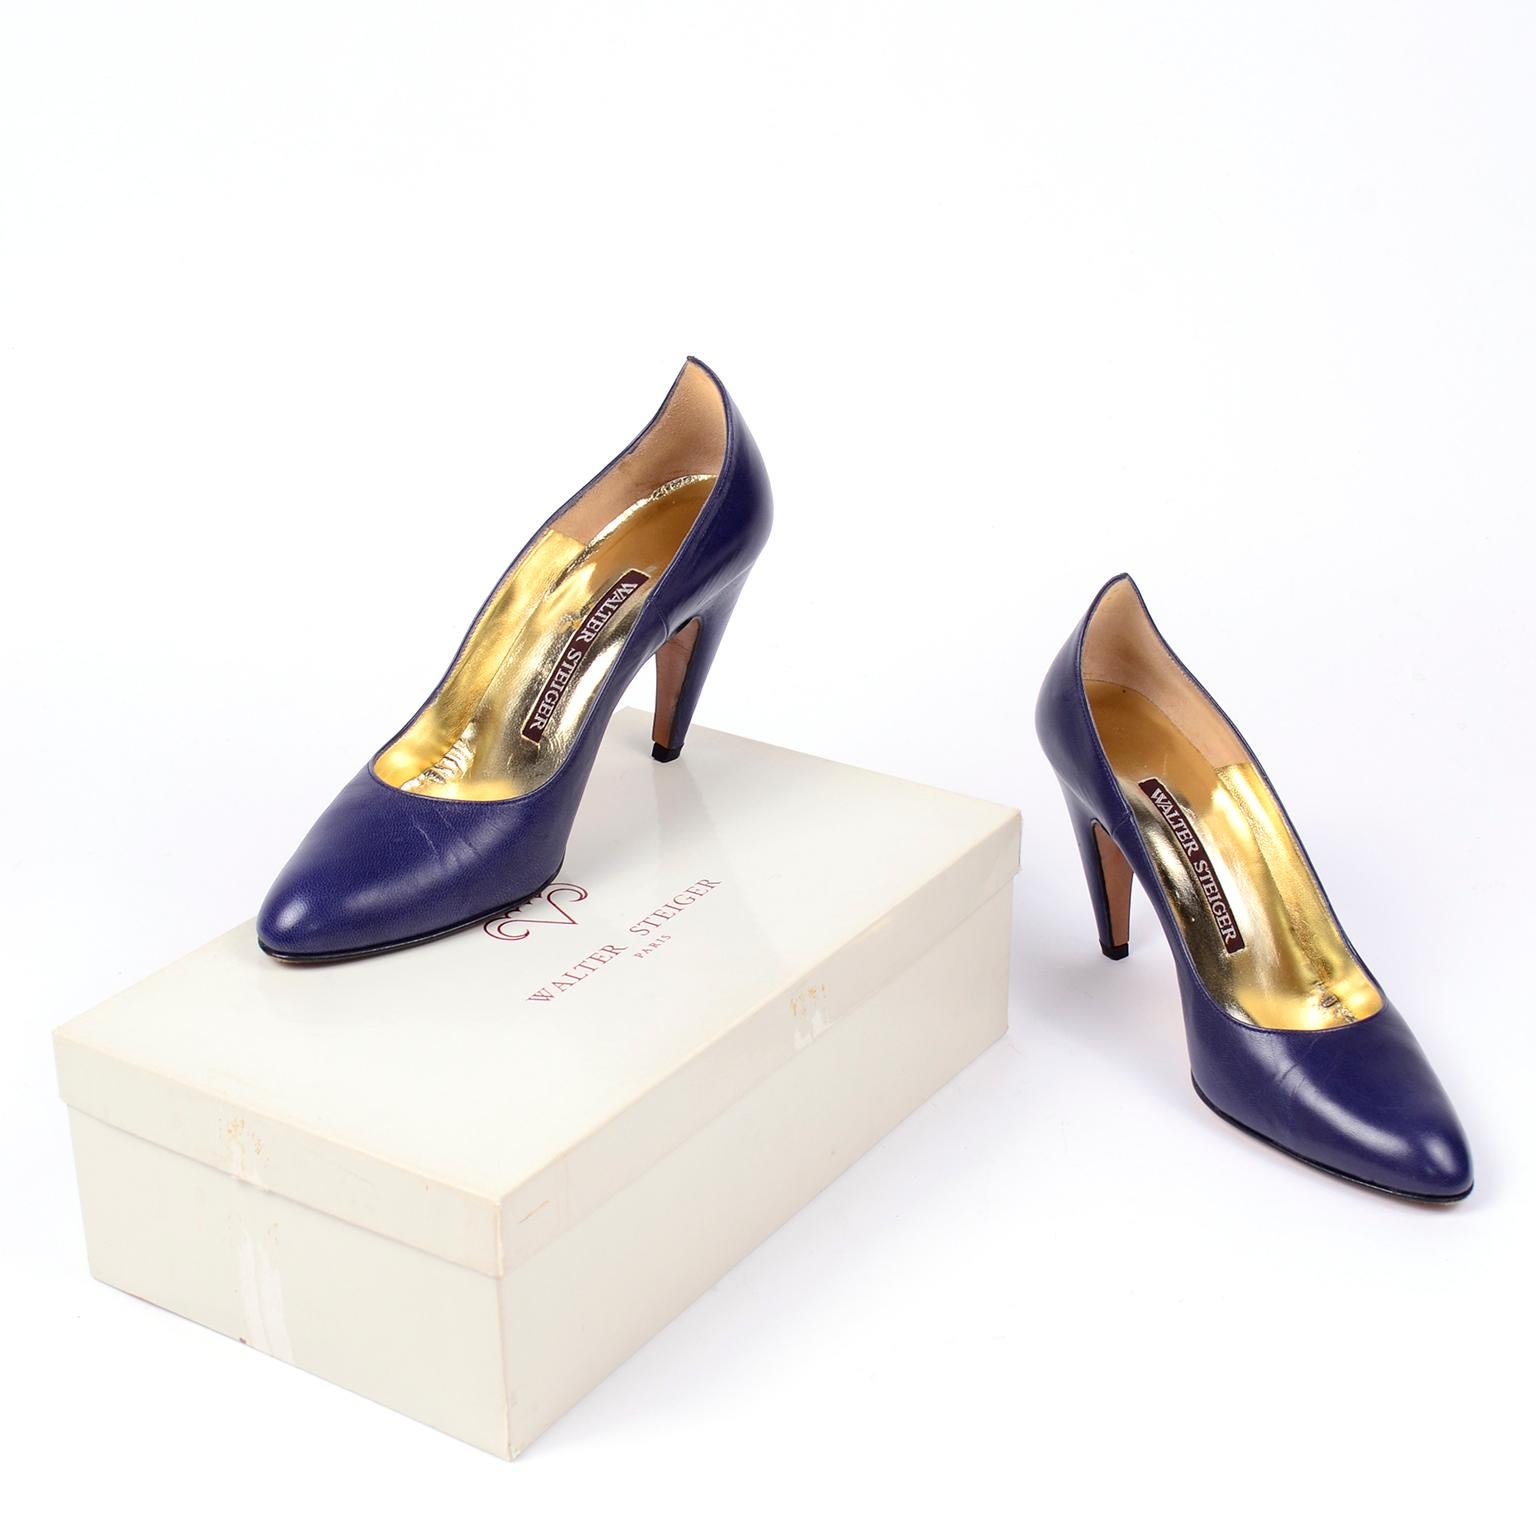 These incredible avant garde vintage Walter Steiger shoes make such a great fashion statement! They are in a wonderful royal blue leather and they have the Steiger signature unique curved heel that leads to a dramatic point at the back of the ankle.